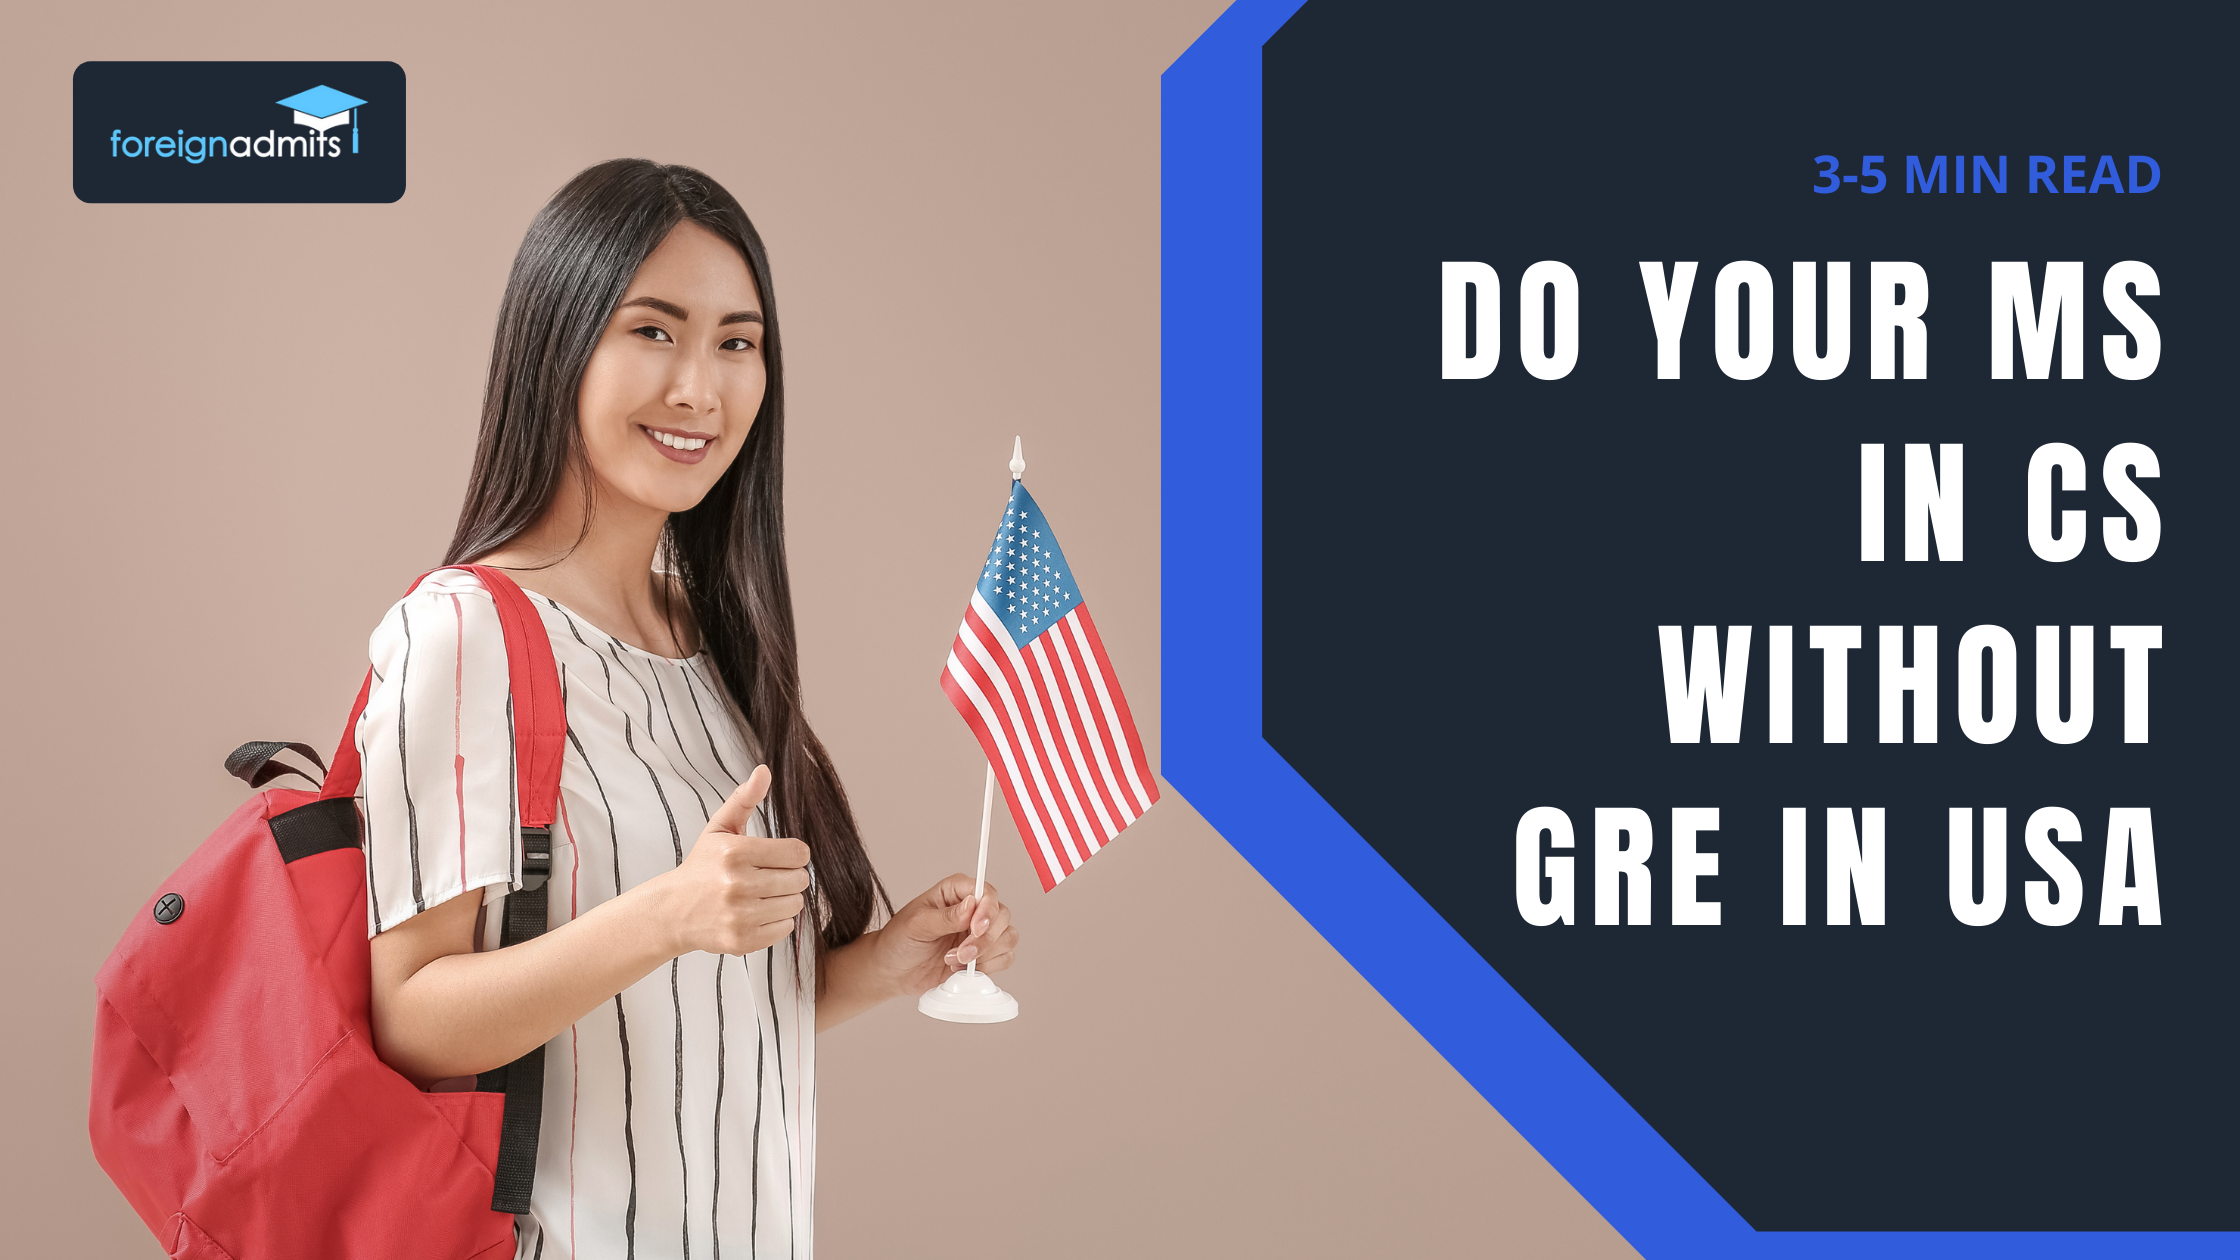 GRE Waiver for MS in CS at Top Ranked US Universities